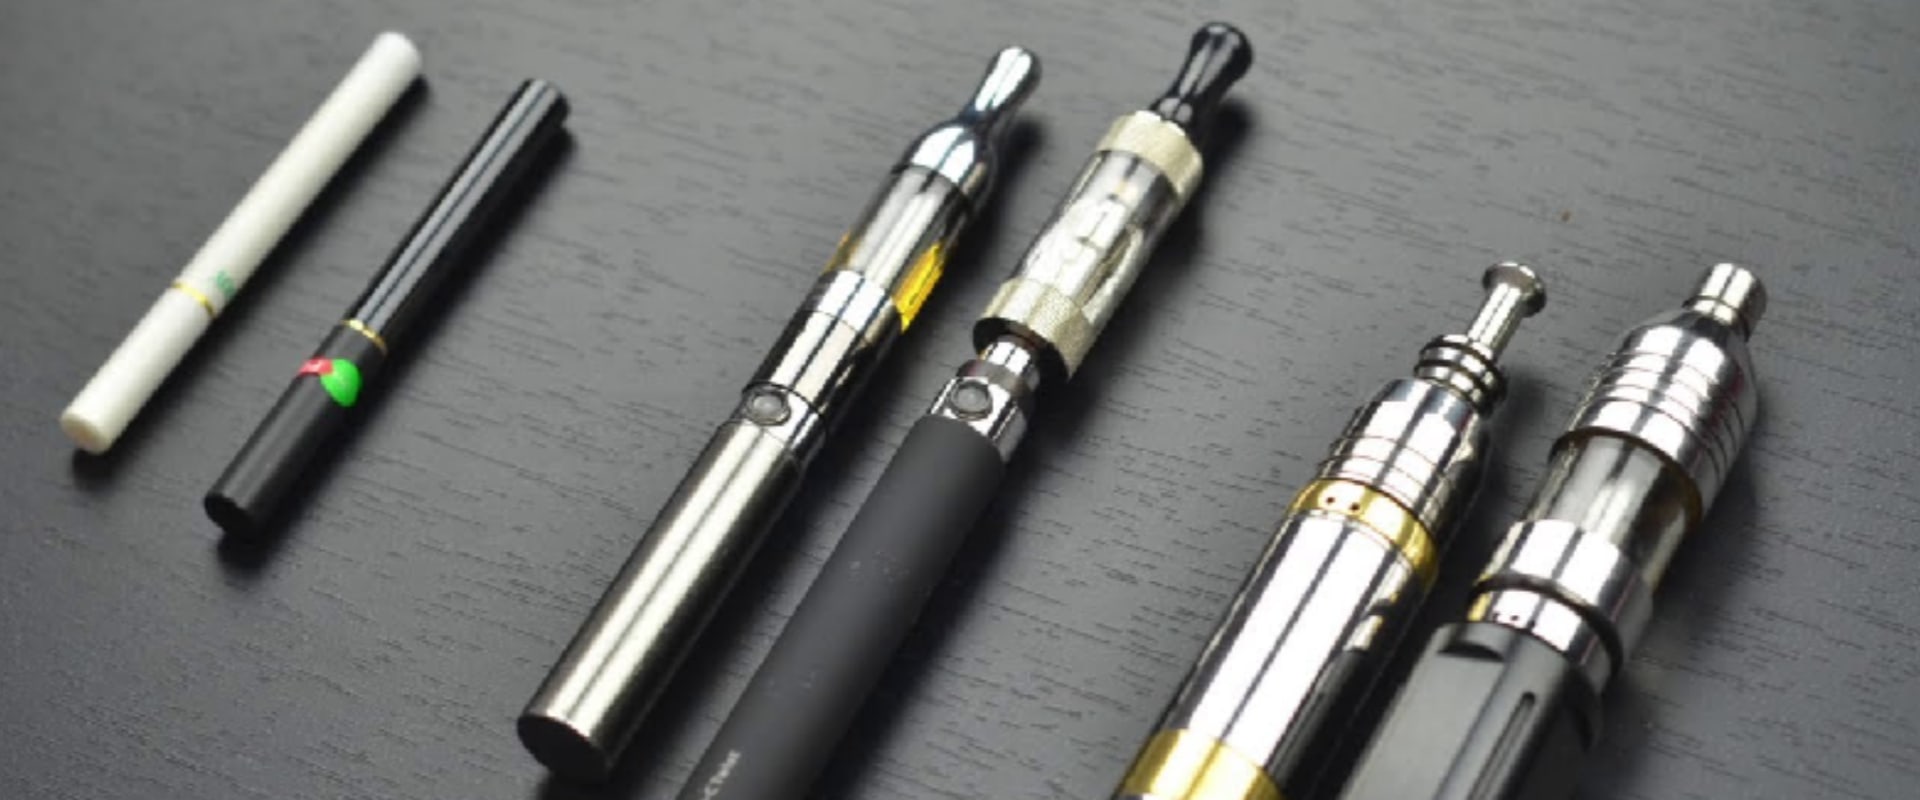 Vape Pen vs Box Mod: What's the Difference?